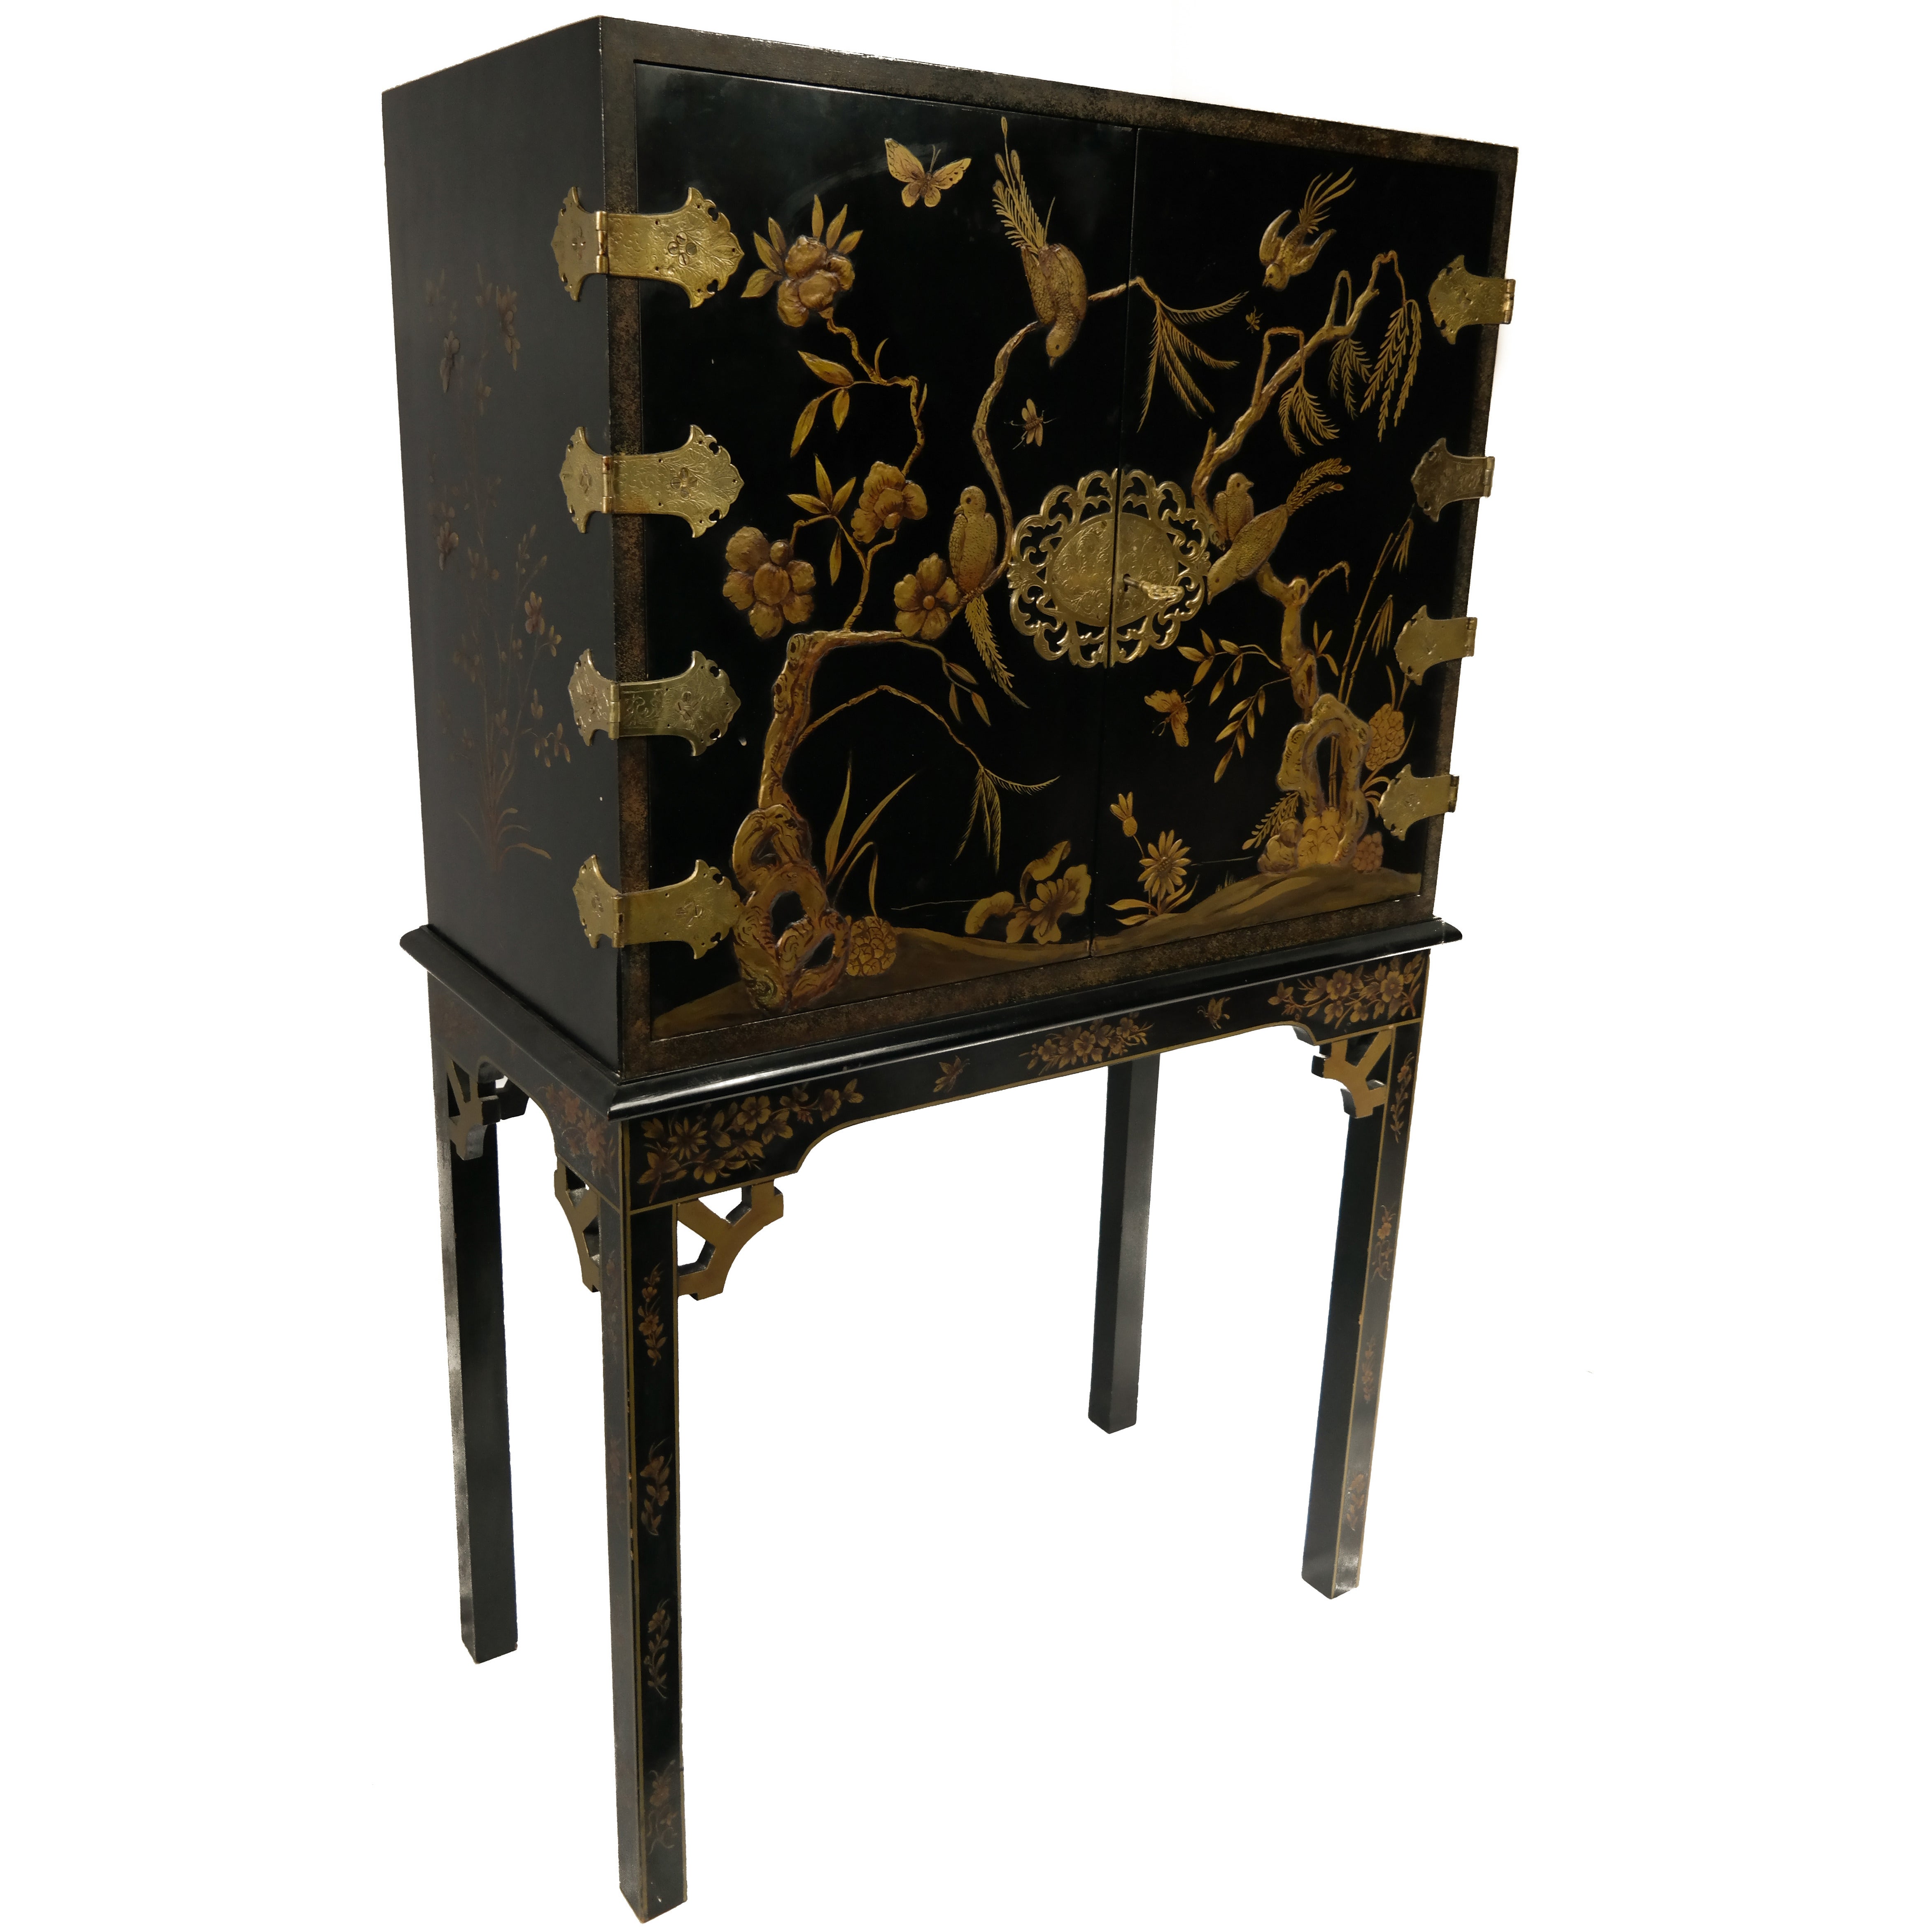 English Chinoiserie Drinks Cabinet of the Highest Quality